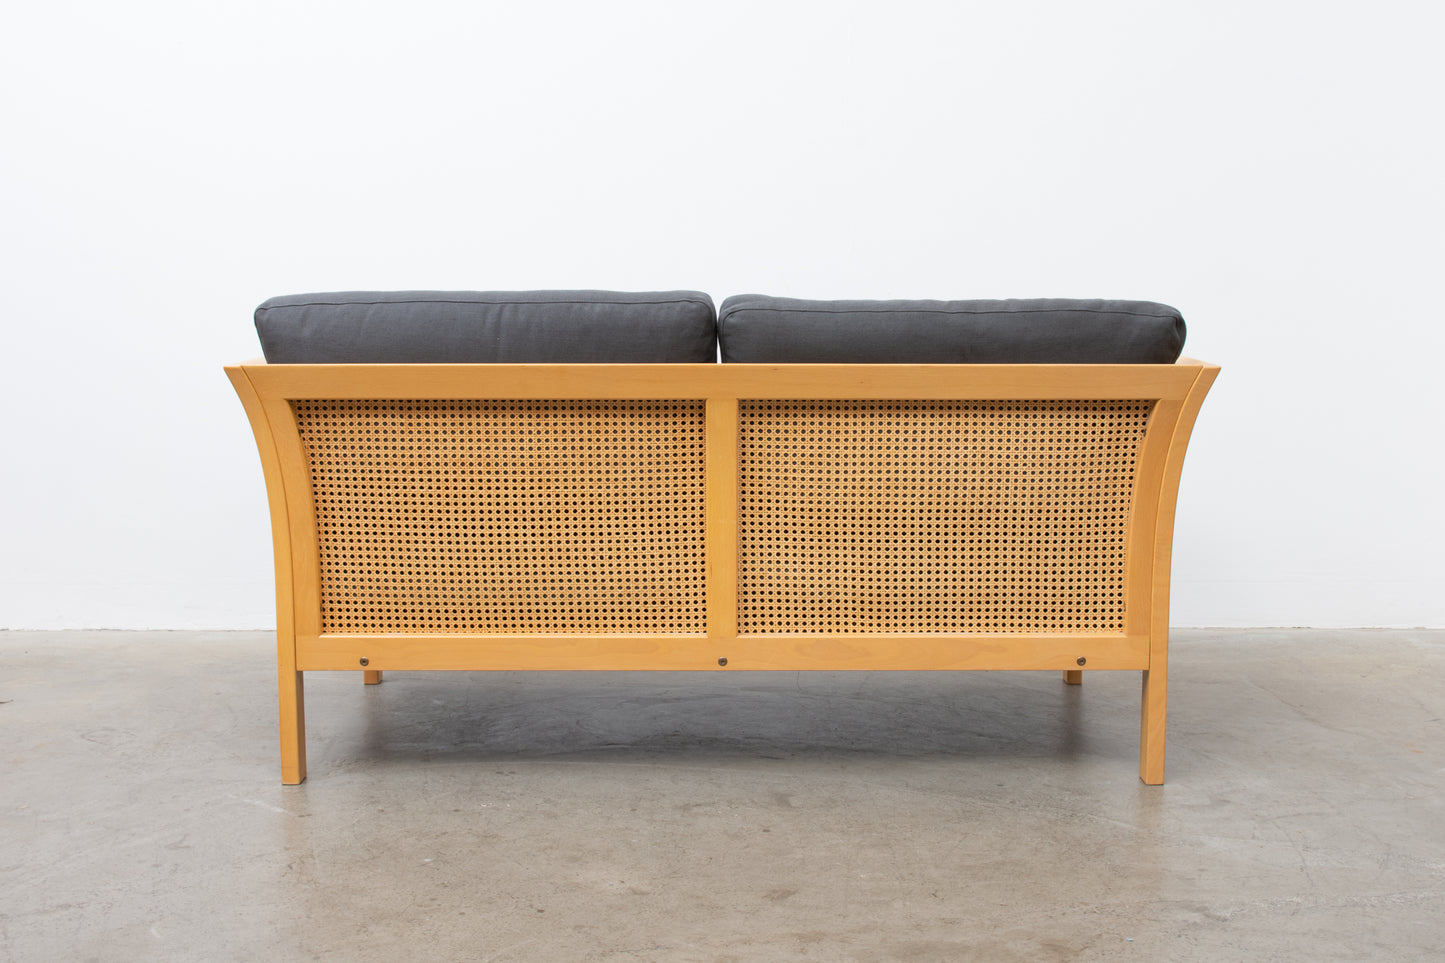 Newly upholstered: Two seater by Arne Norell